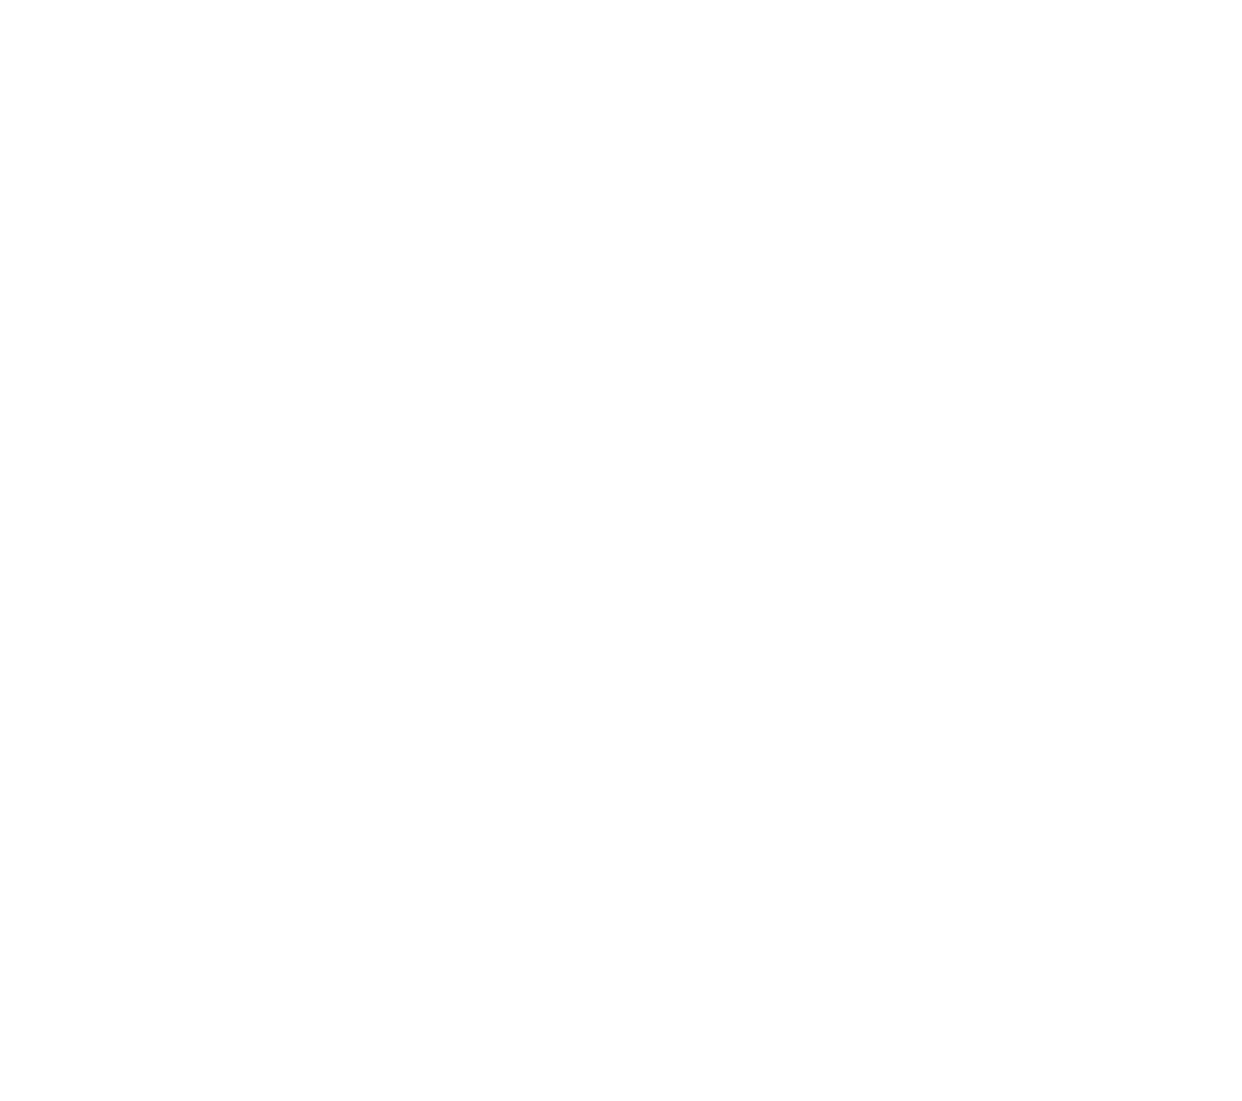 An Environment Group runs every Thursday lunchtime and sees students discuss produce including “the wonky shapes in c...